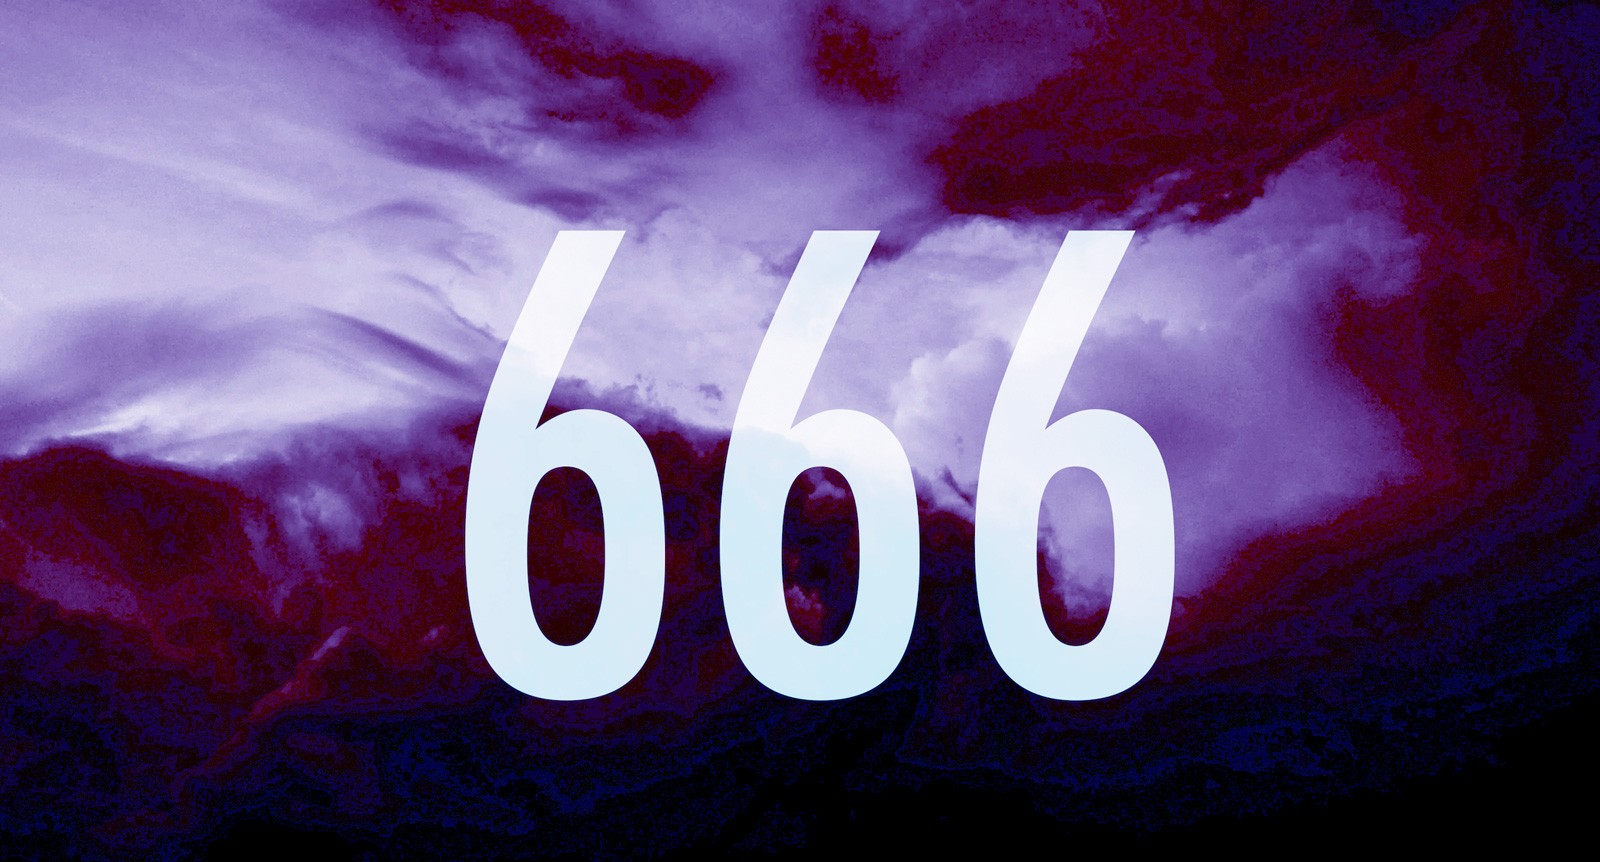 Symbolic Meaning of 666 and Common Sense on Whats-Your-Sign